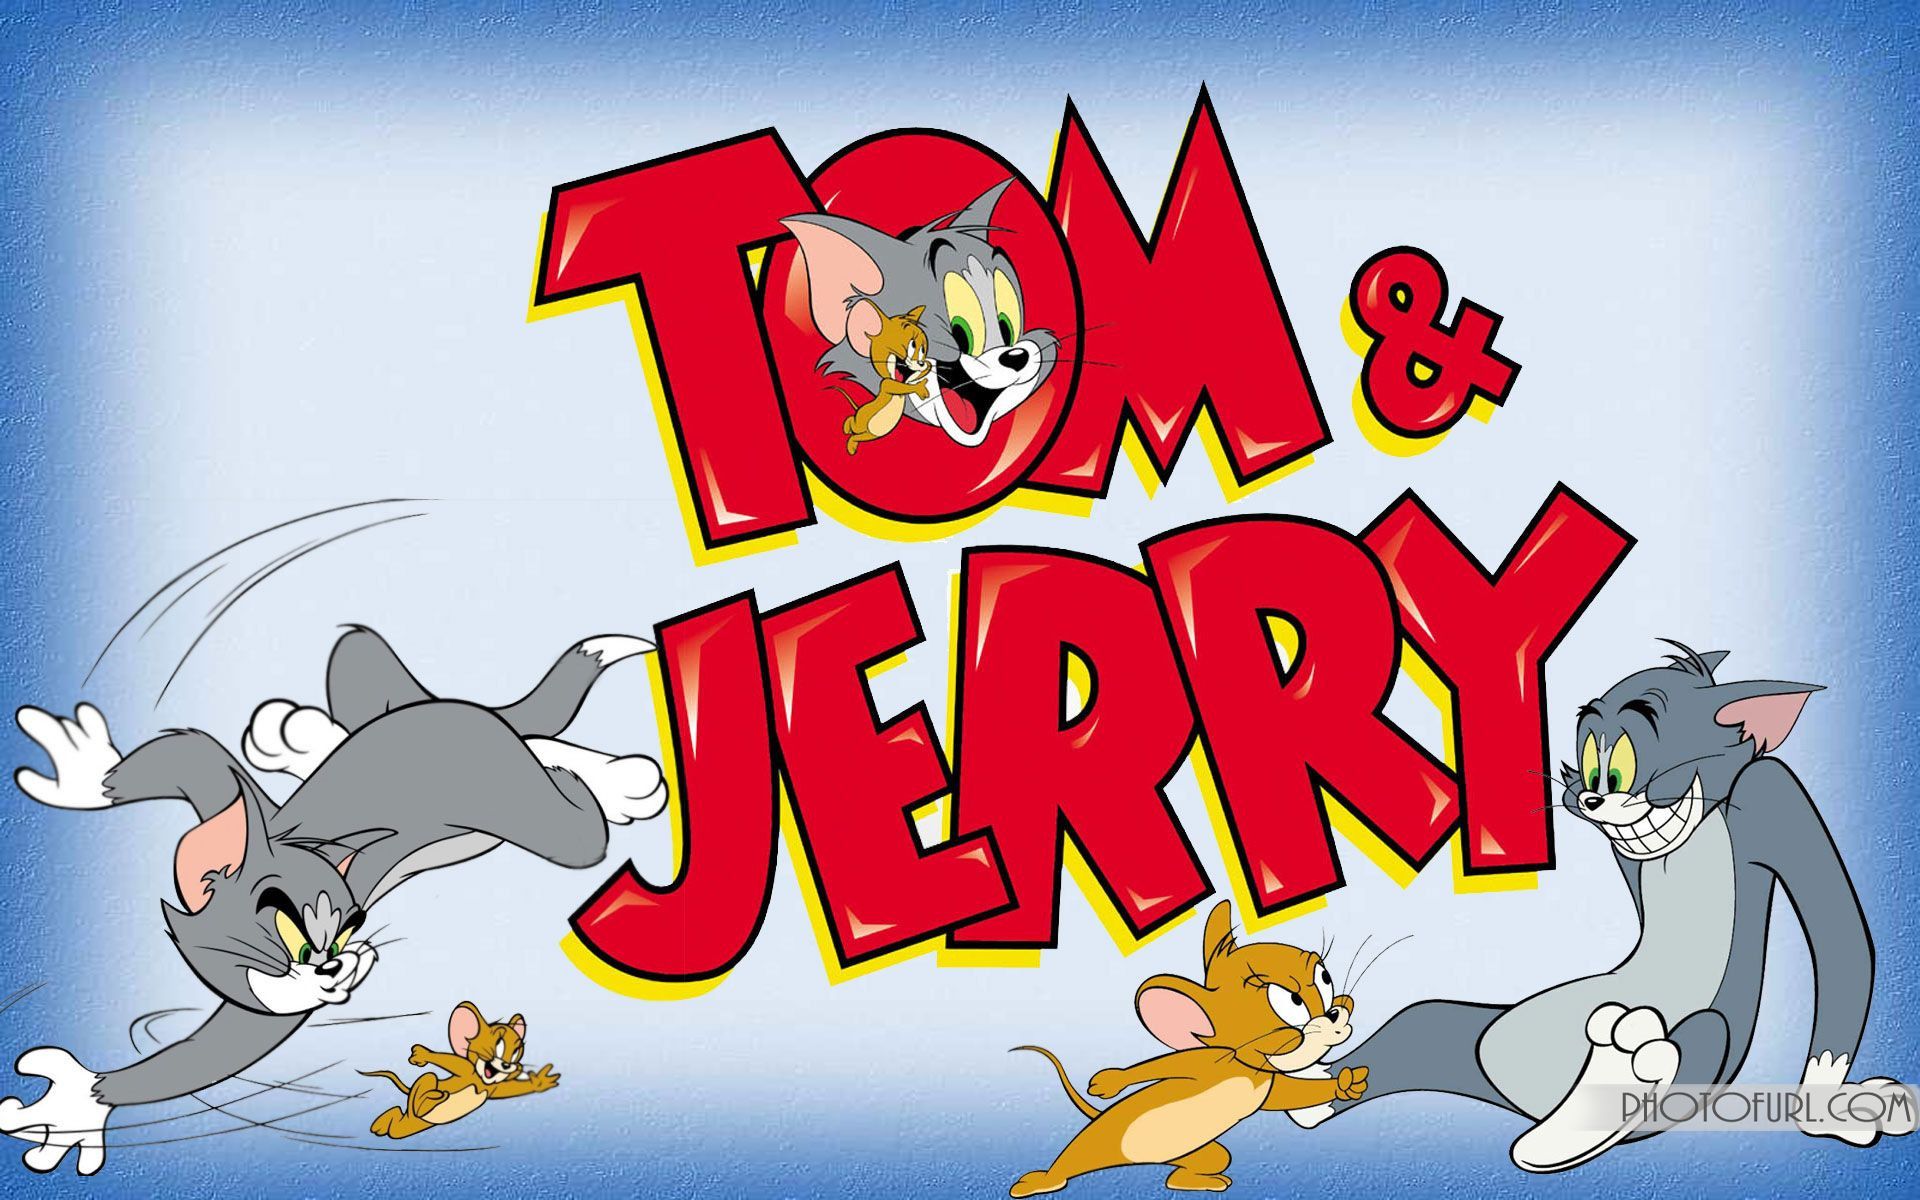 Tom And Jerry Cartoon Full HD Wallpaper Image For Pc